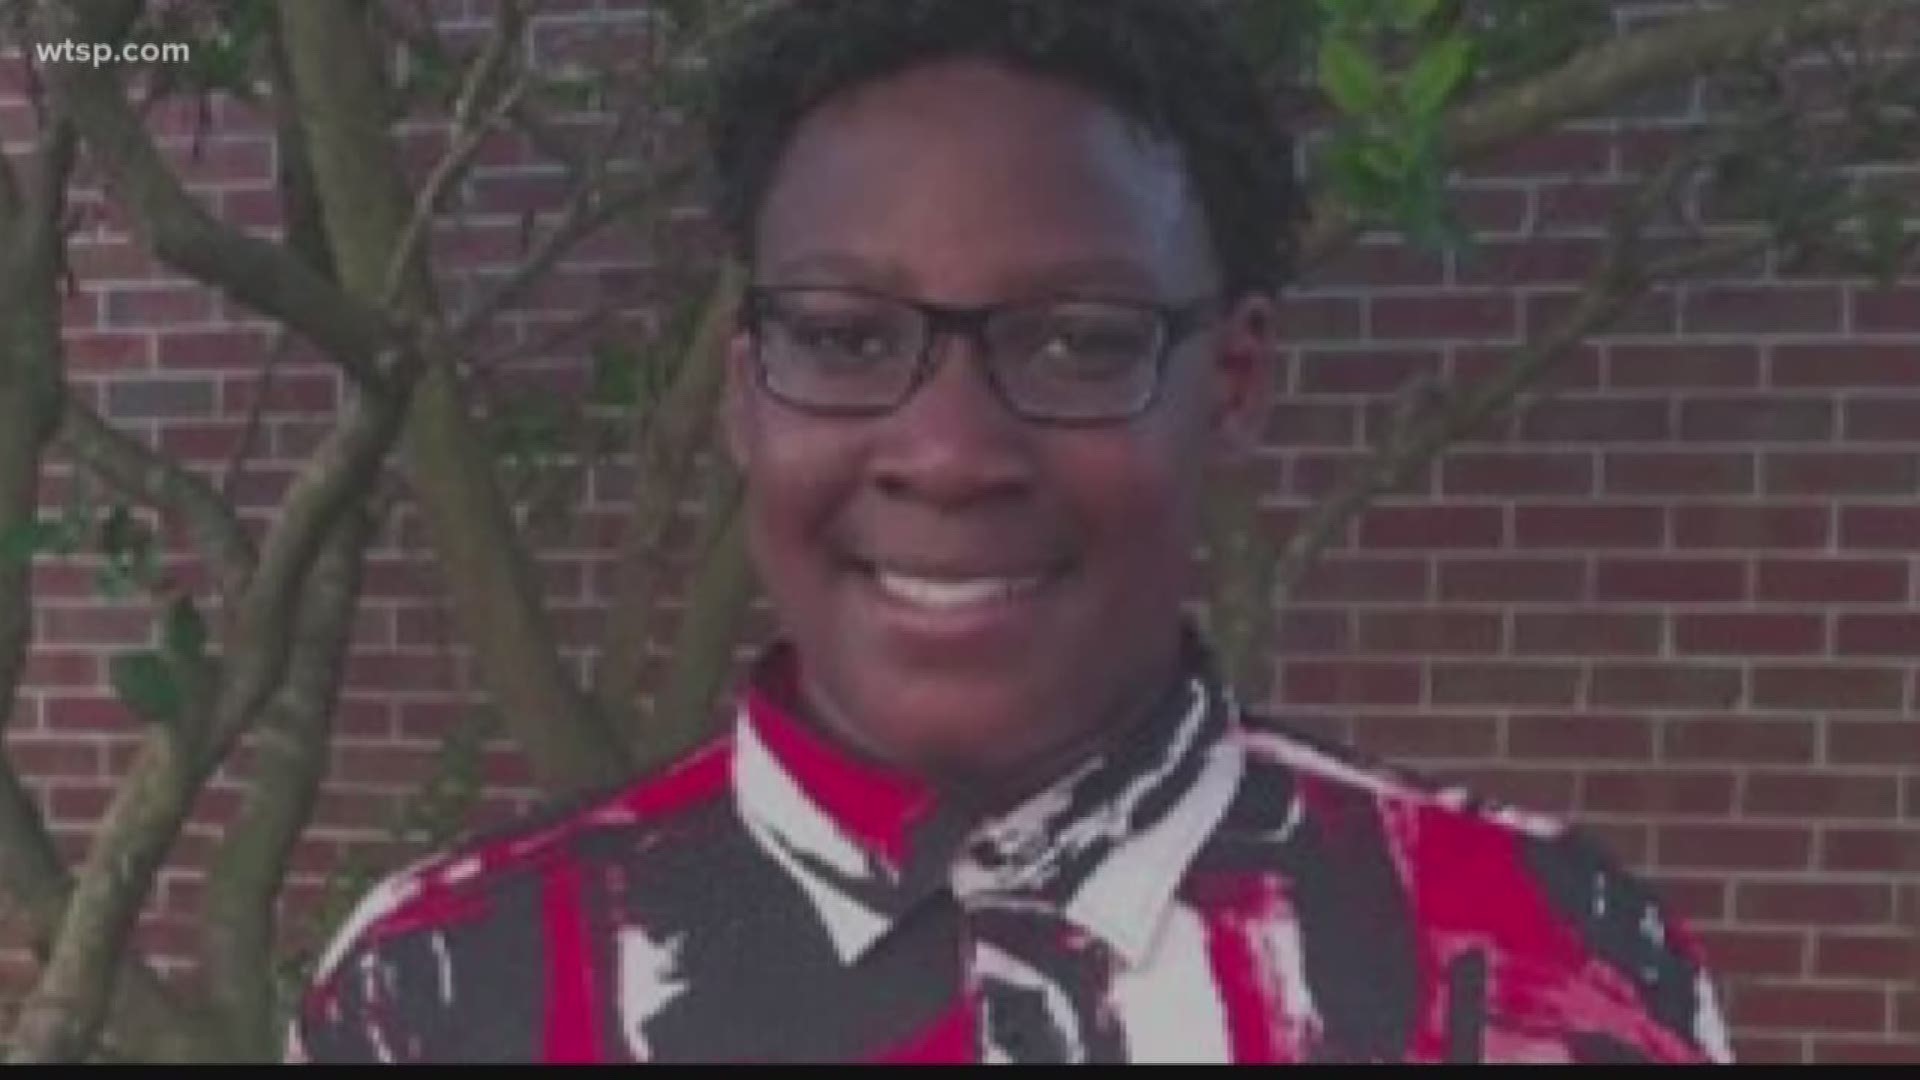 Hezekiah Walters' parents are grieving after their son collapsed and died following football conditioning drills. In the middle of that profound loss, they are working to make a change in Hillsborough County Schools, demanding an athletic trainer in all schools and ensuring protocols are followed.